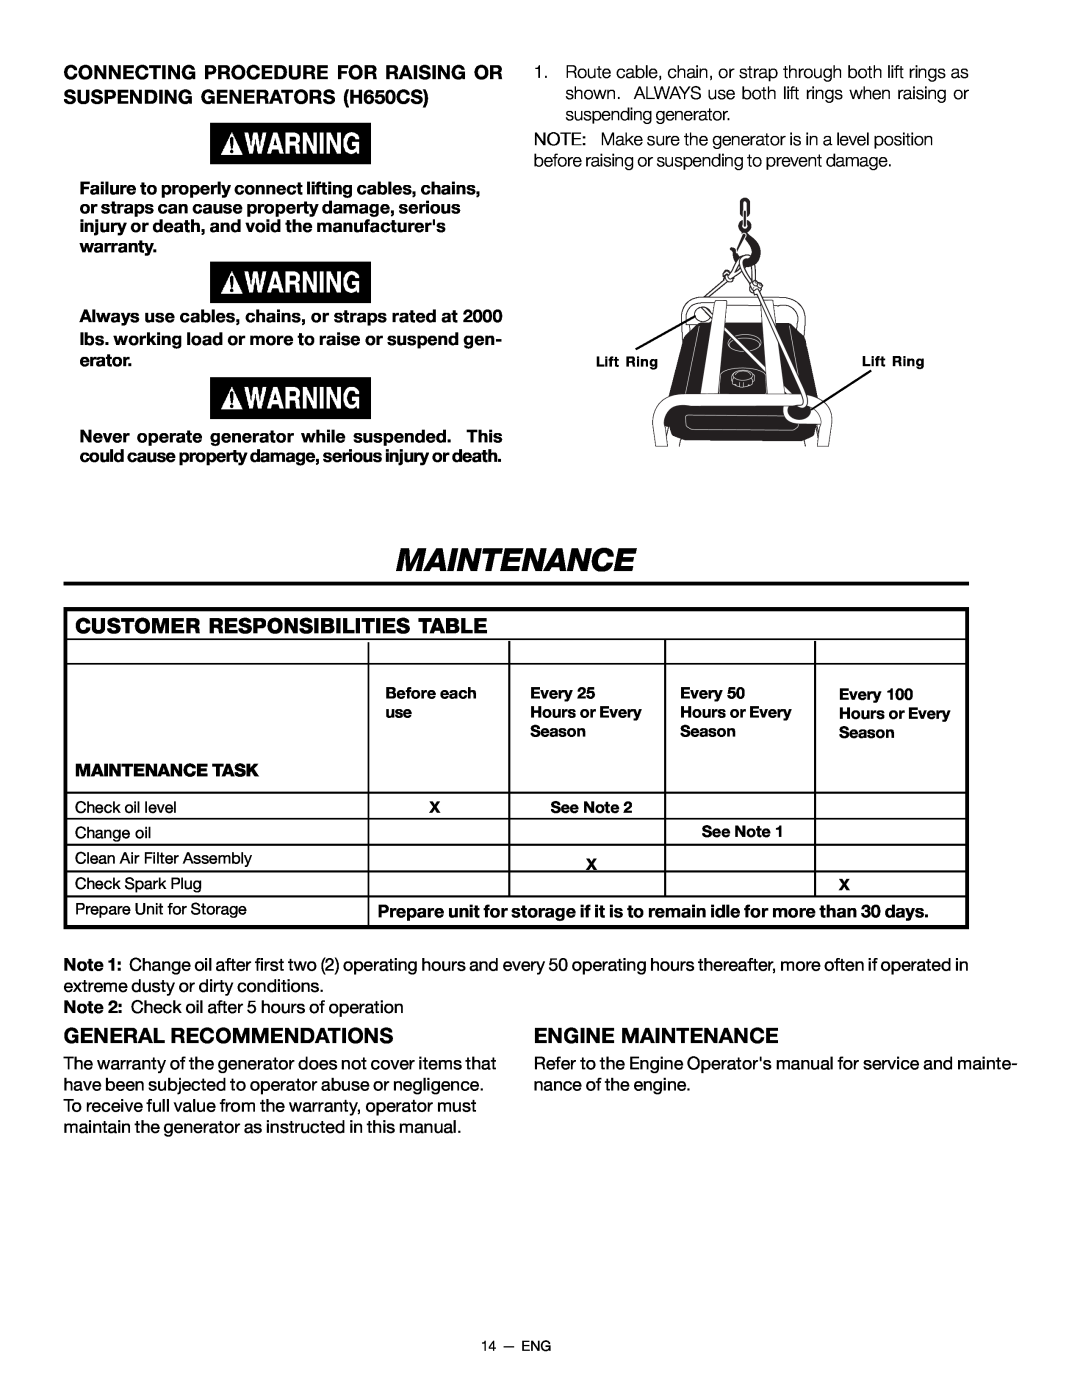 Porter-Cable CH350CS Customer Responsibilities Table, General Recommendations, Engine Maintenance, Maintenance Task 